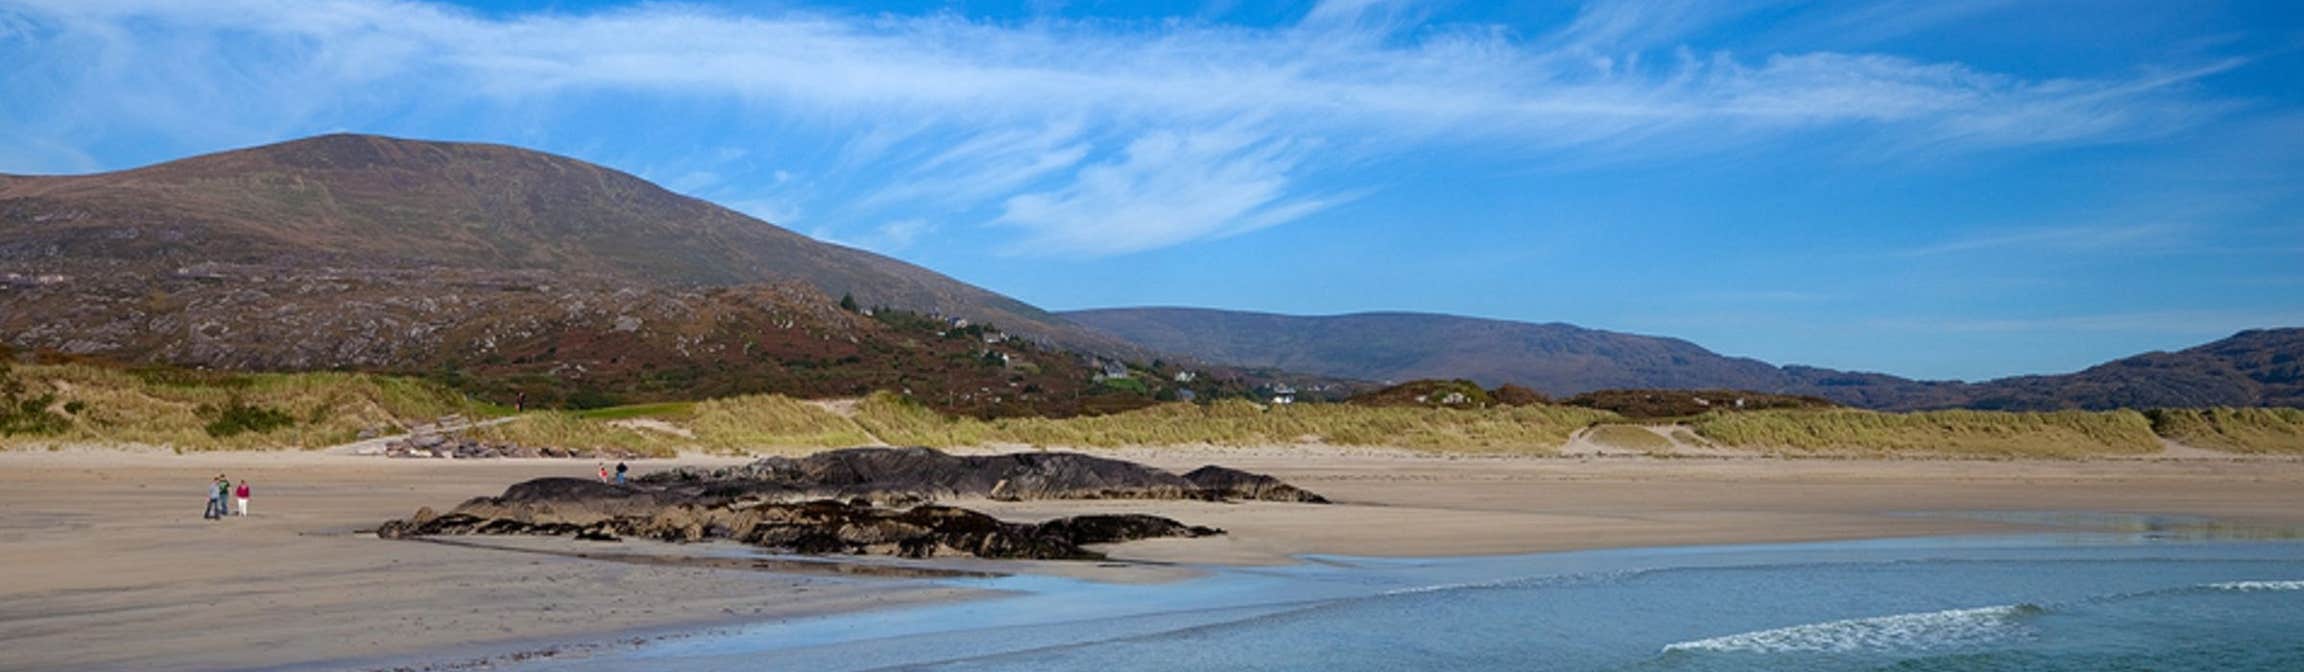 Image of Derrynane beach in Caherdaniel in County Kerry